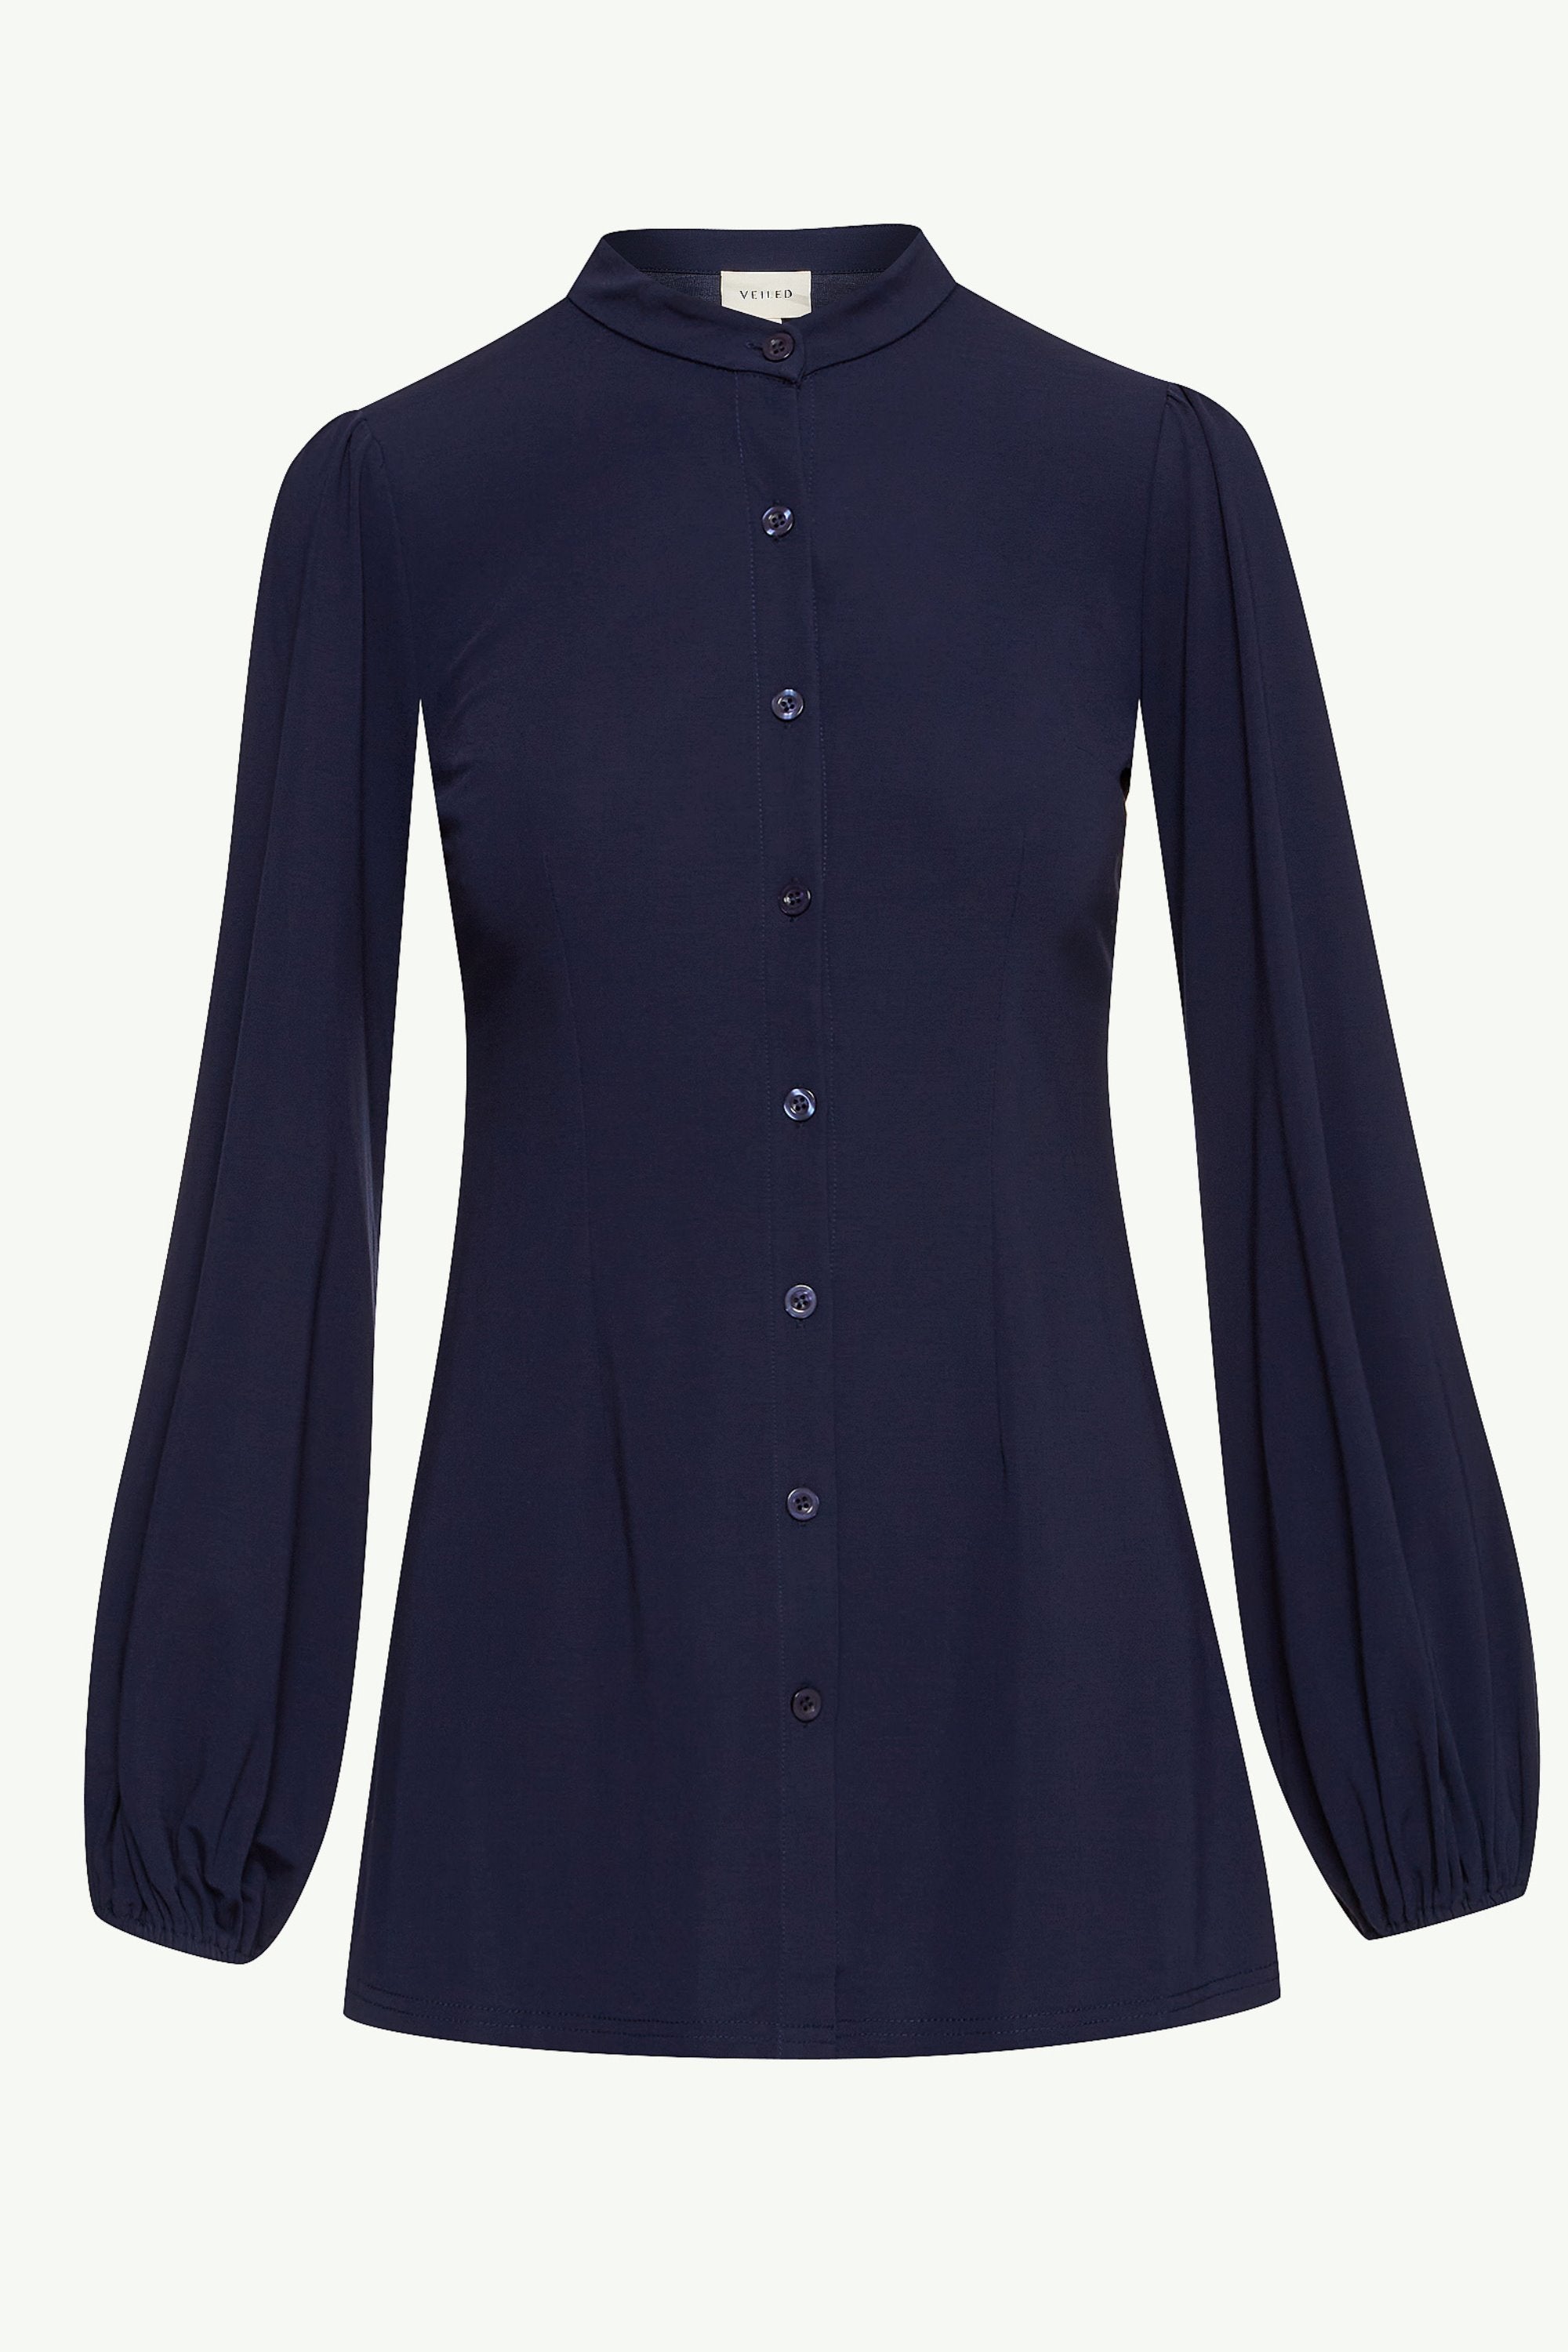 Rayana Jersey Button Down Top - Navy Blue Clothing epschoolboard 